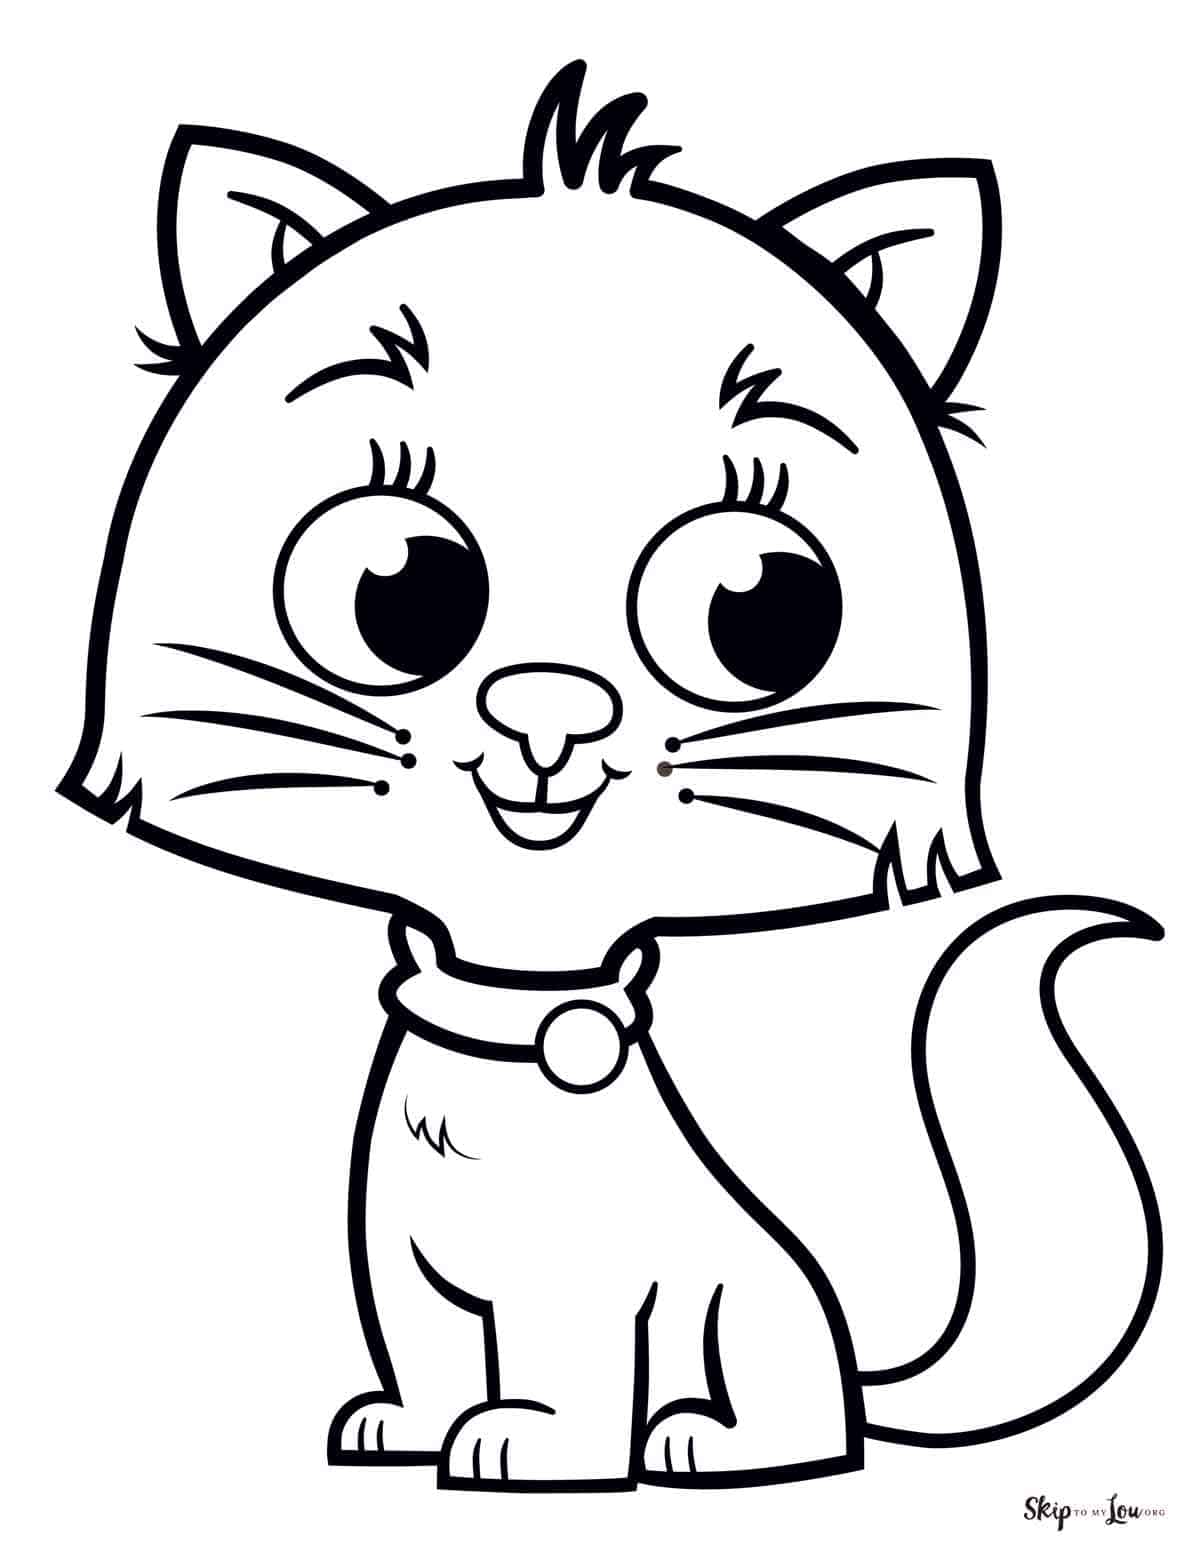 Cute kitty coloring pages skip to my lou